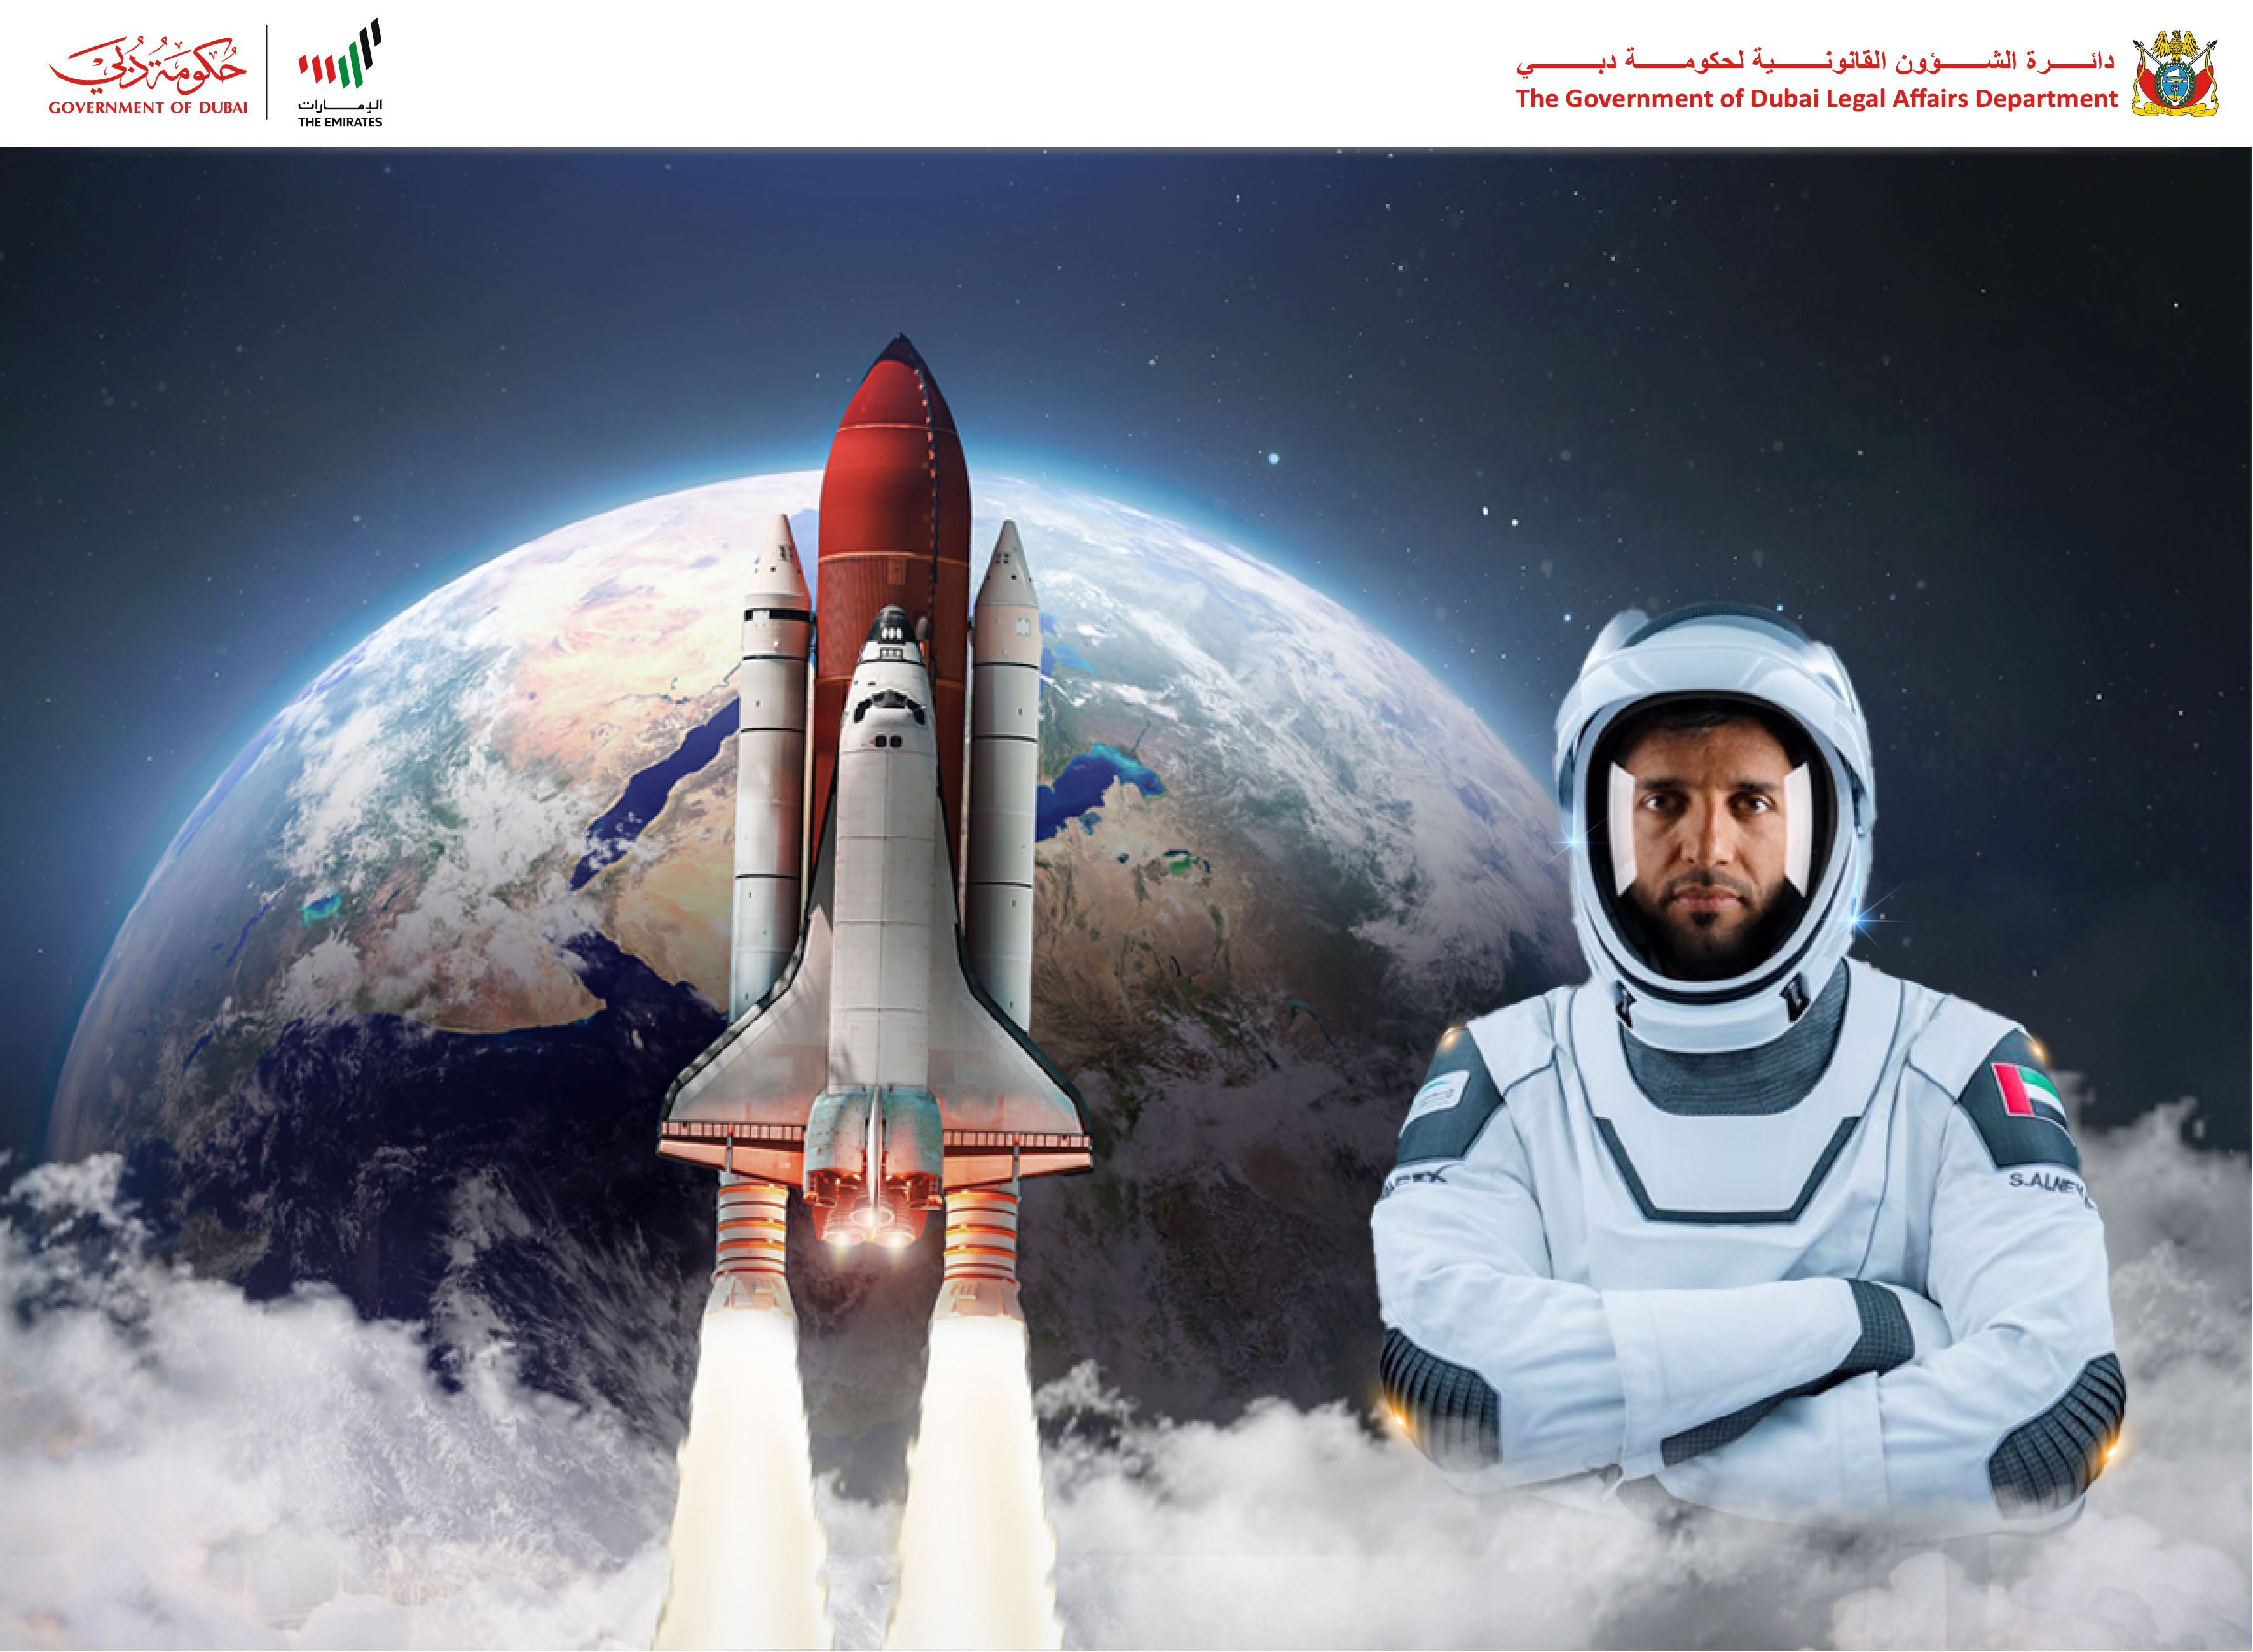 Statement of His Excellency Dr. Lowai Mohamed Belhoul, Director General of the Government of Dubai Legal Affairs Department, on the Occasion of the Participation of Sultan Al Neyadi in the International Space Mission